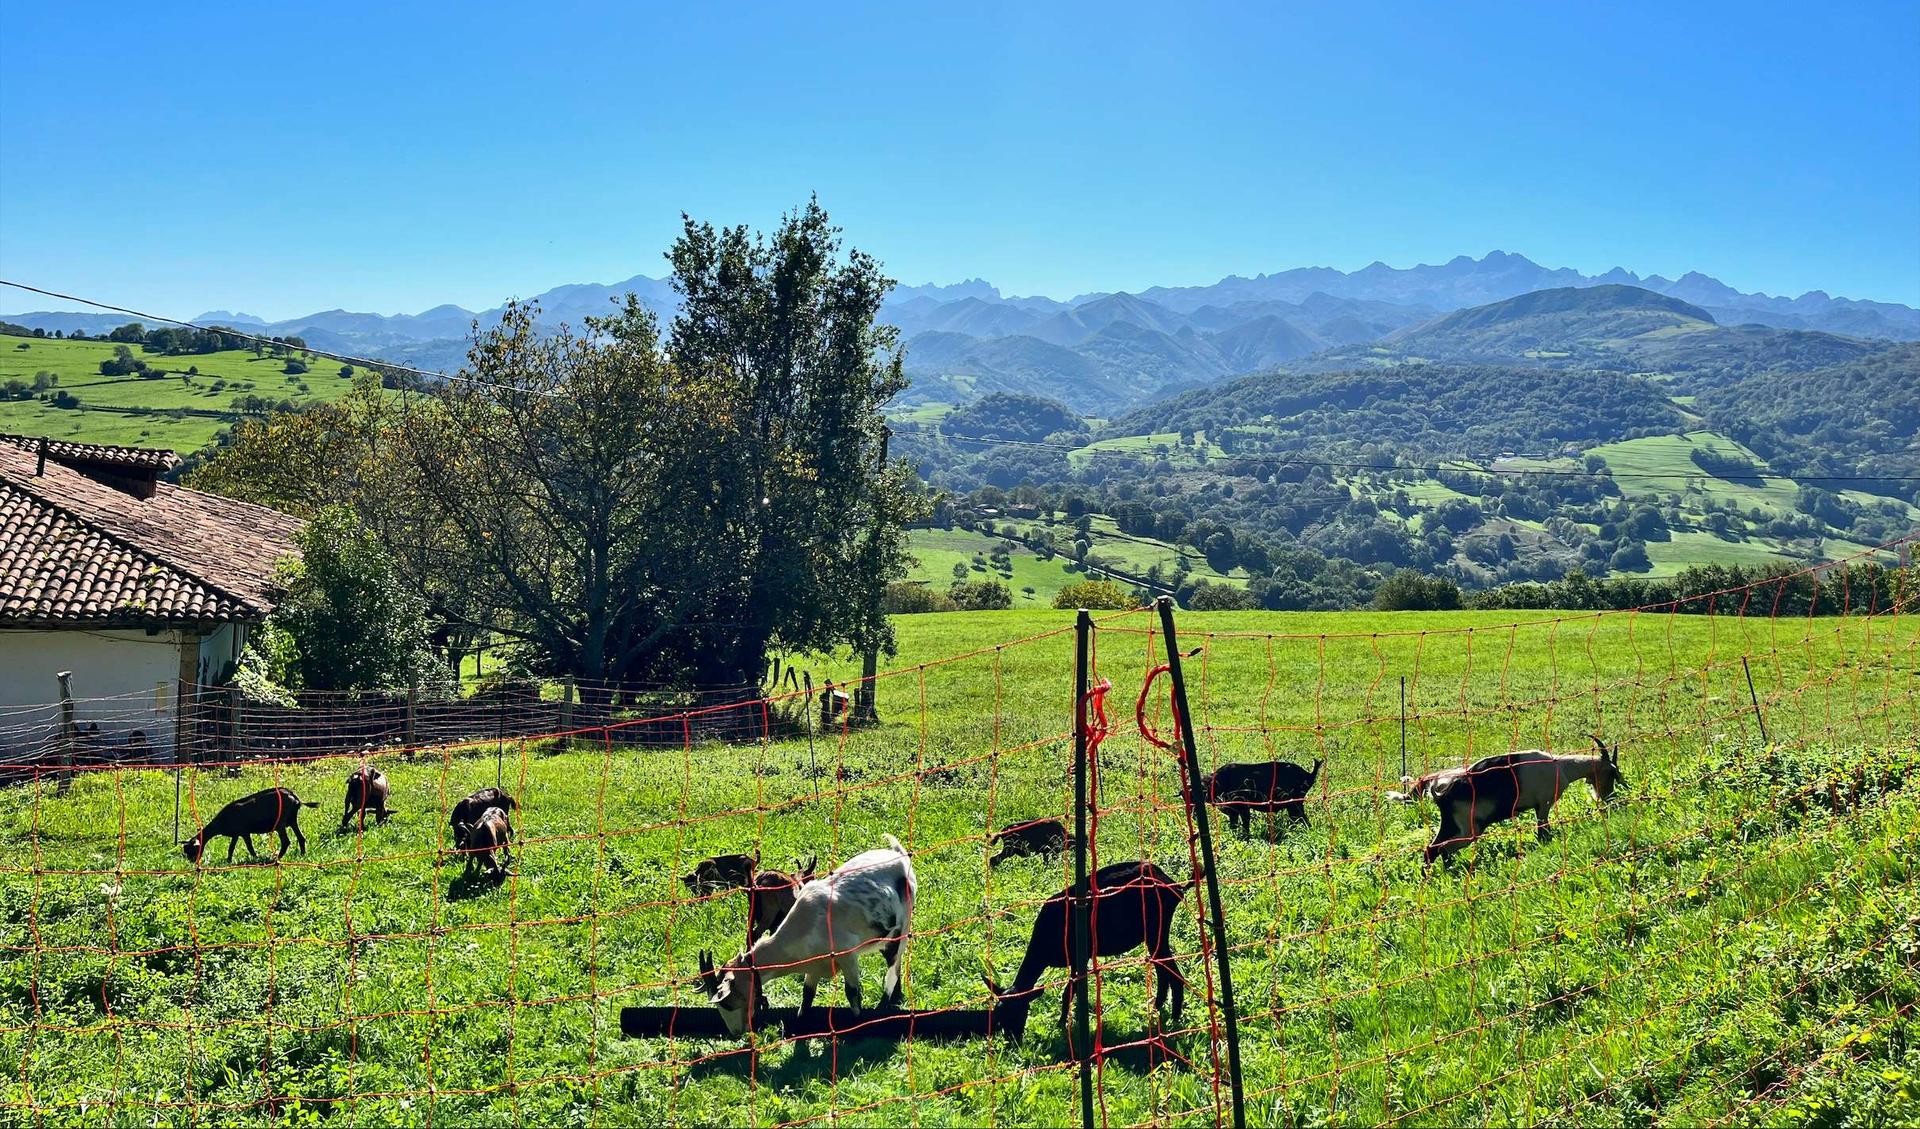 Goats on a fields in the spanish mountains. The sky is blue and in the background there are green hills.